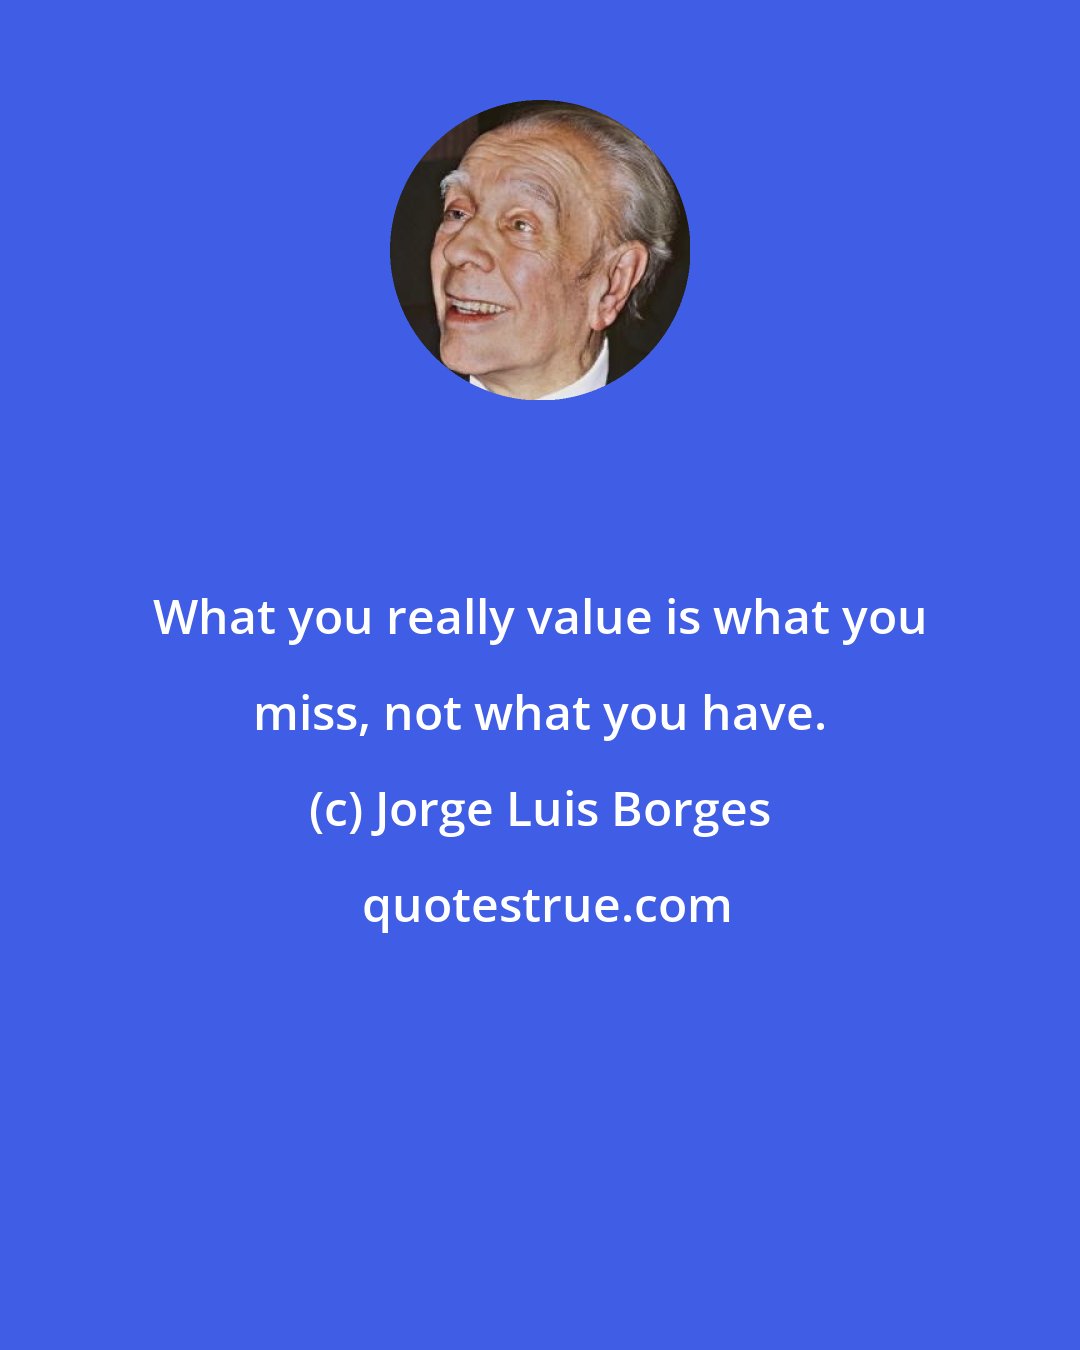 Jorge Luis Borges: What you really value is what you miss, not what you have.